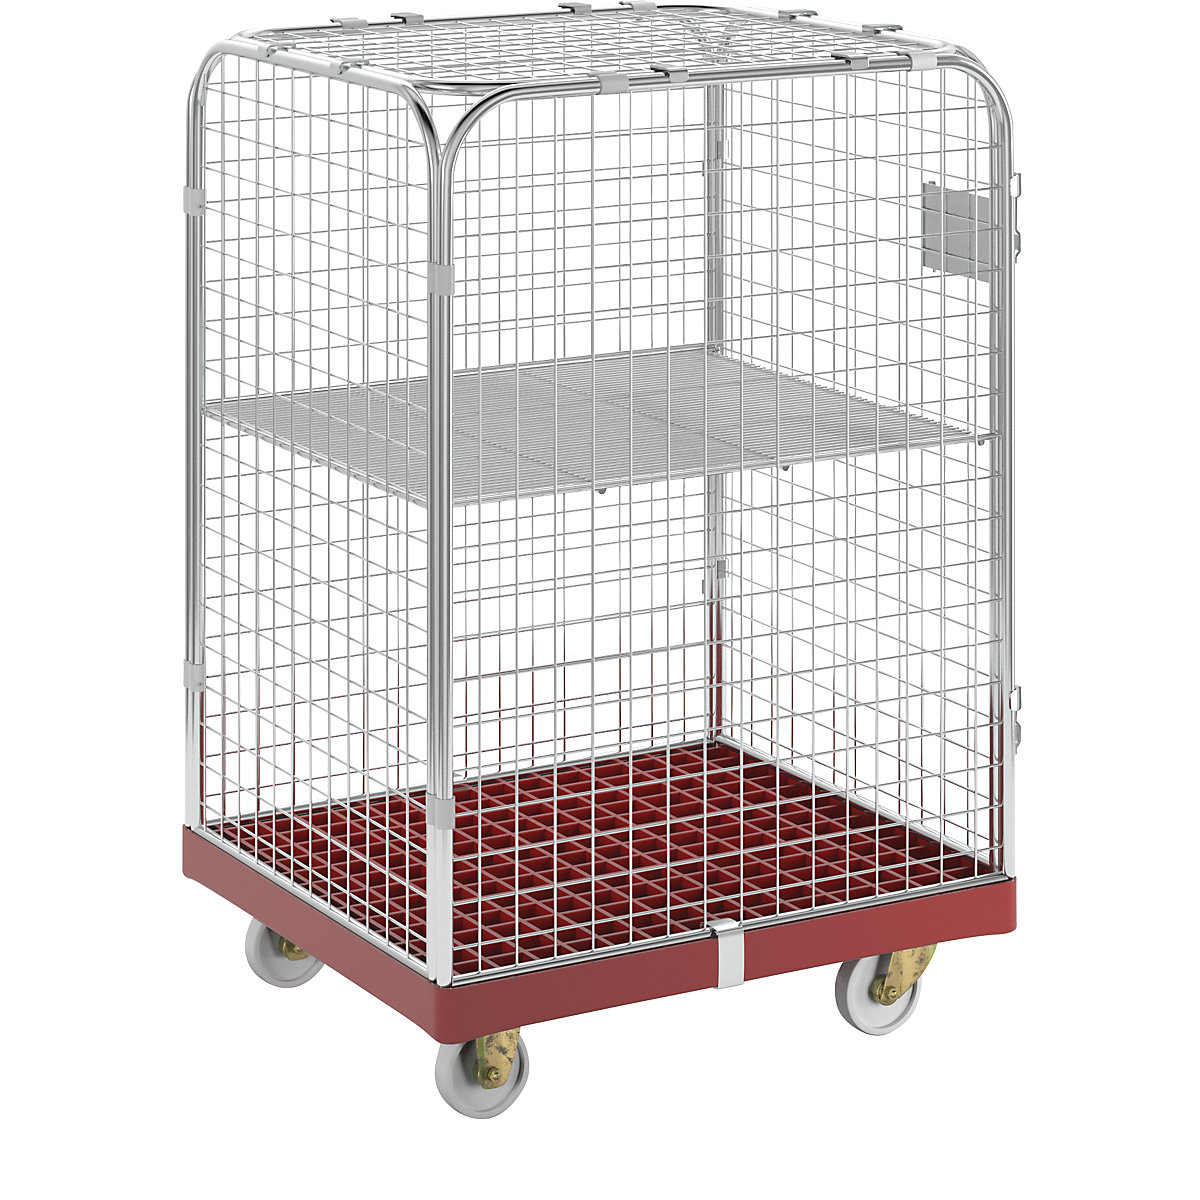 SAFE roll container, HxWxD 1200 x 720 x 810 mm, red transport dolly-2